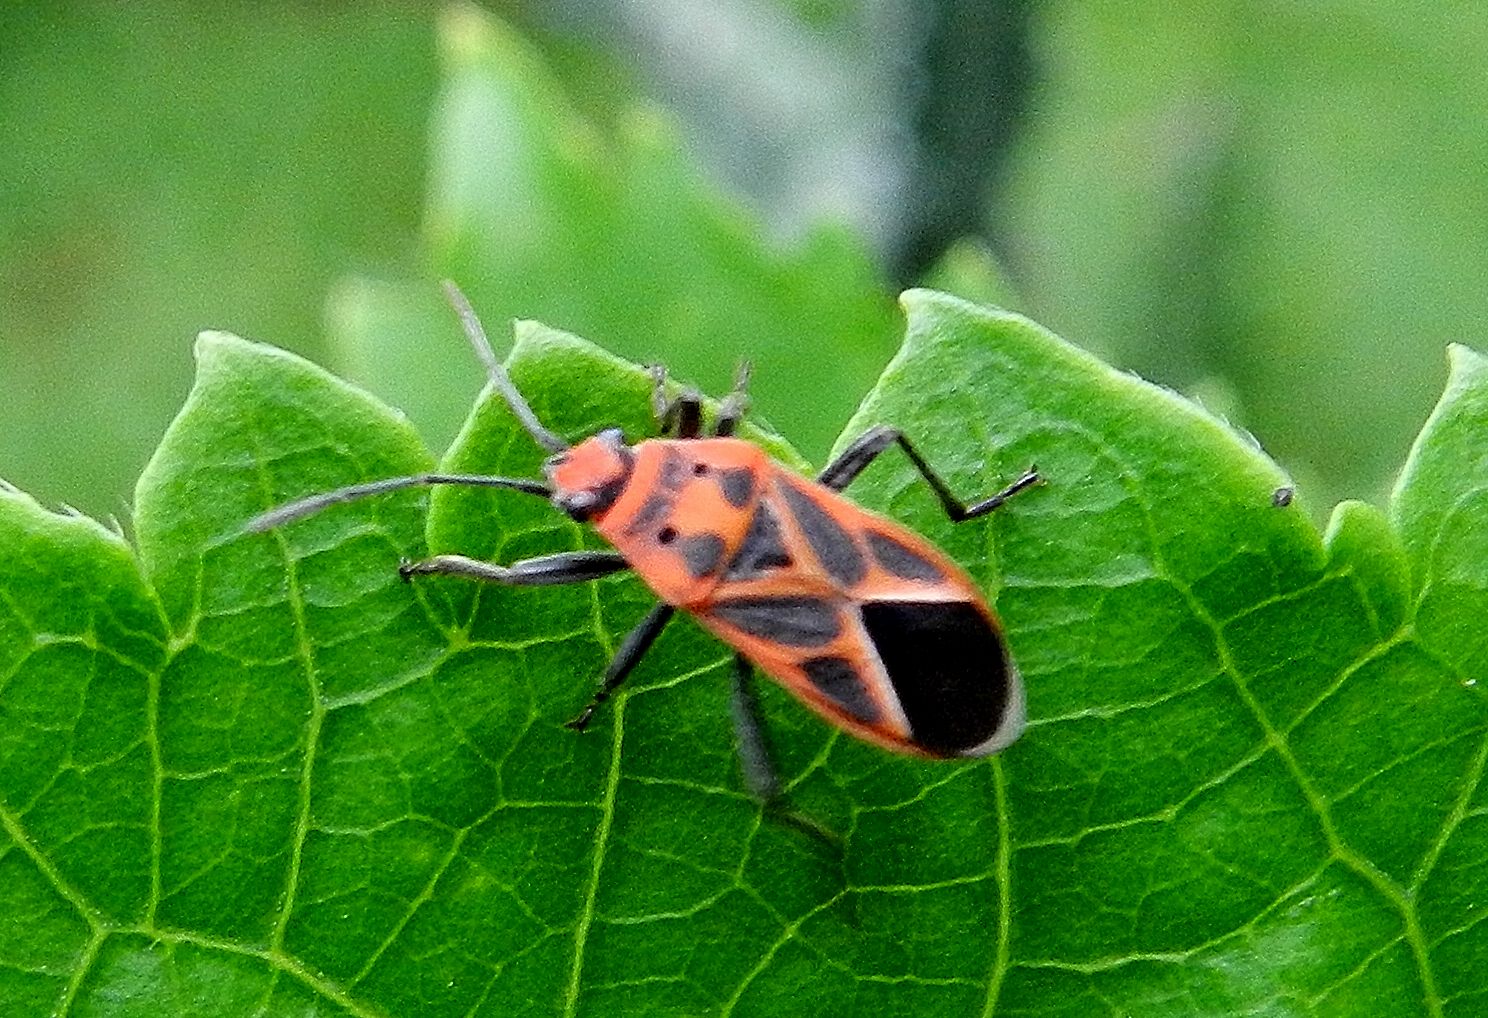 a small brown and black insect on some leaves